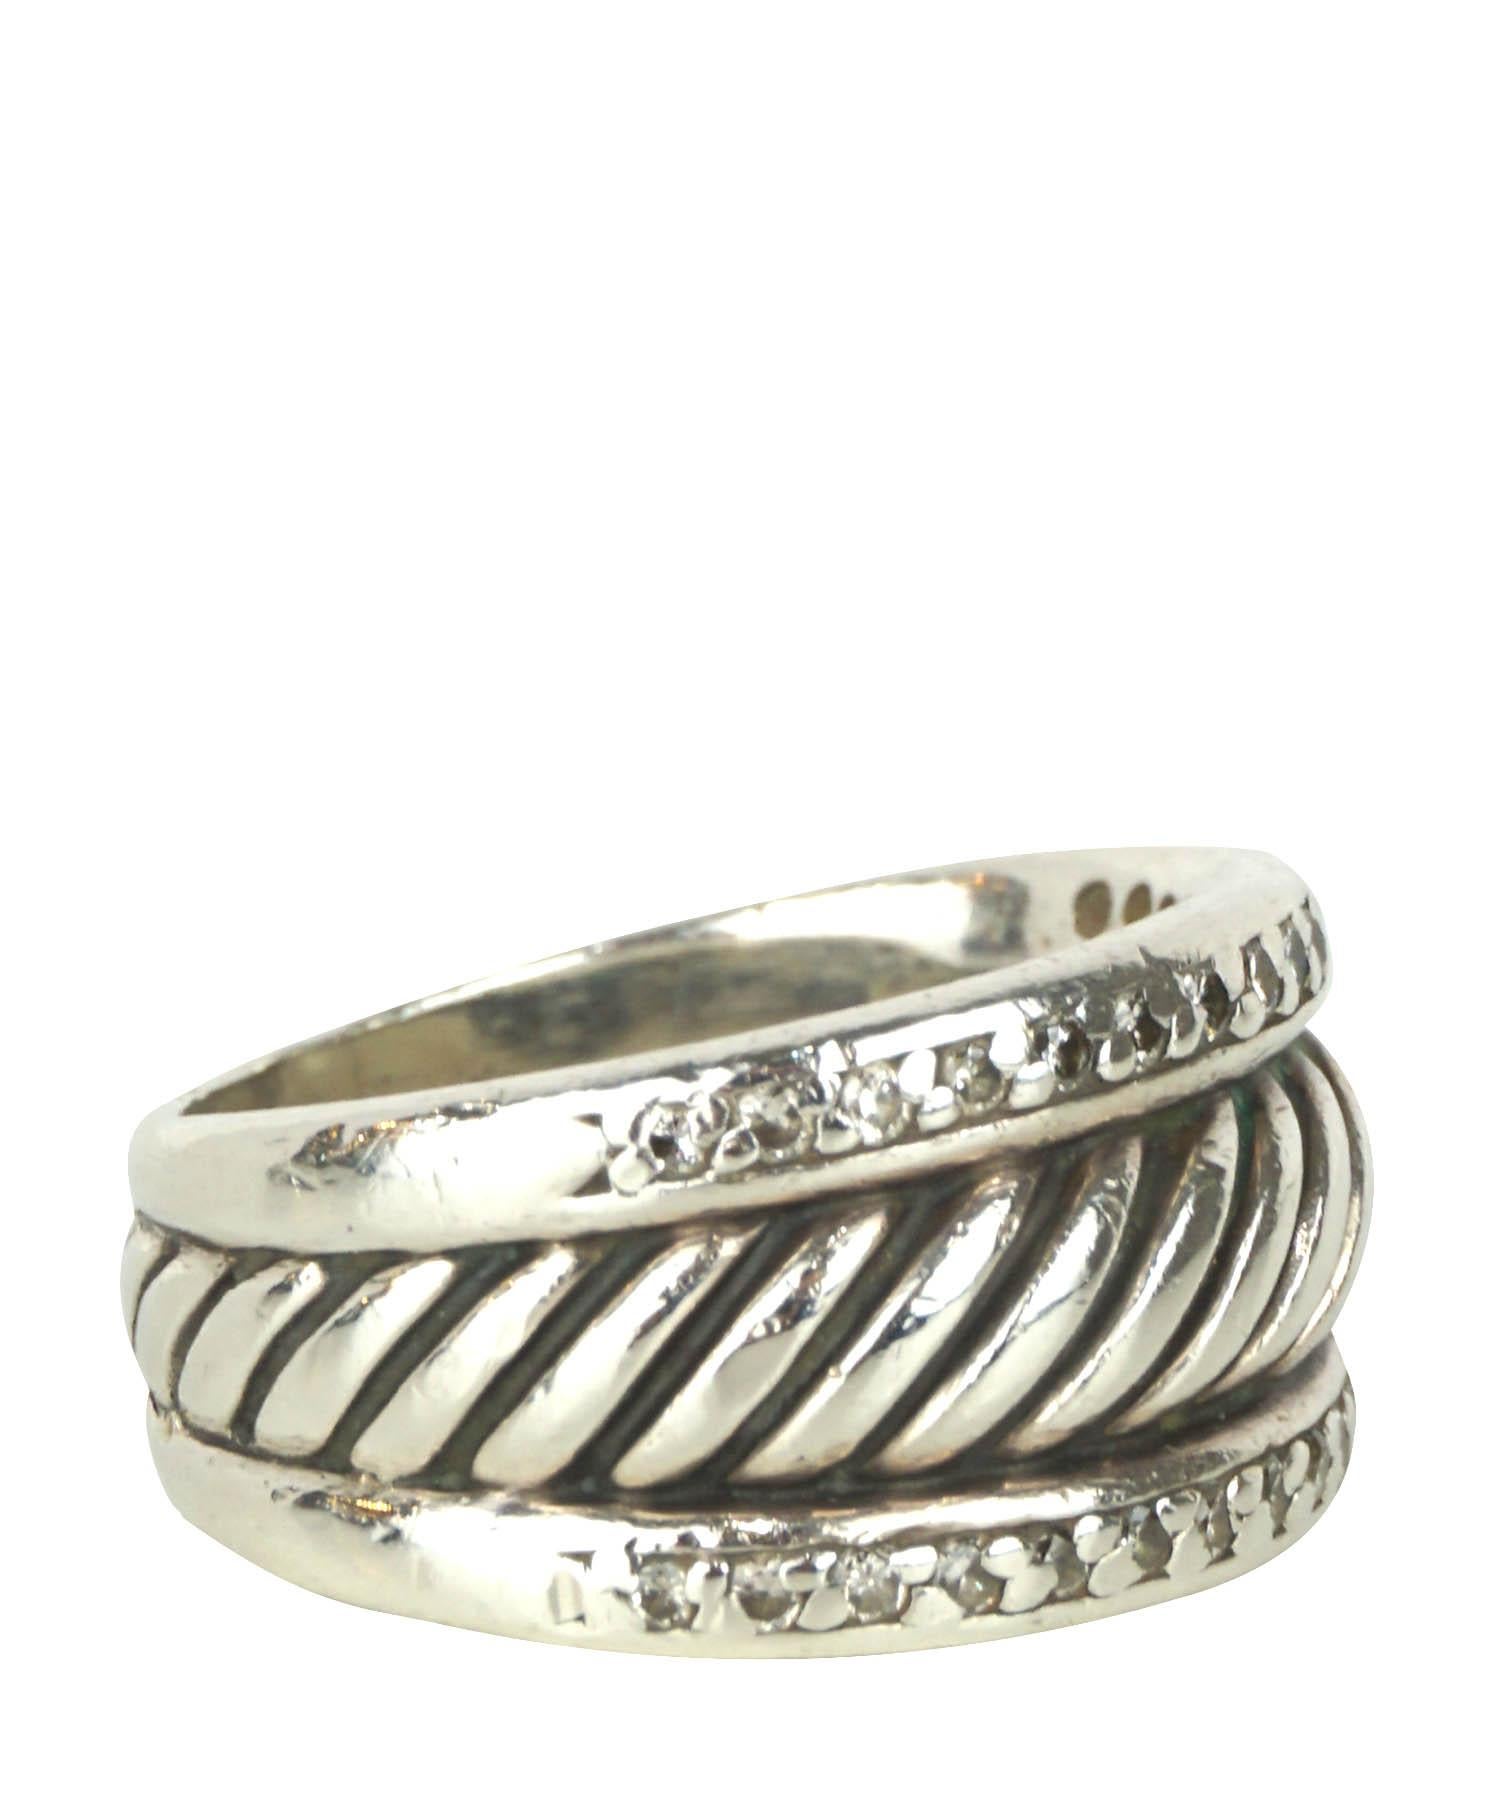 David Yurman cigar band ring features a thick sterling silver band with a cable wrapped center bordered by two rows of pave diamonds. US size 5. Made in New York, USA. Band Width: 3.8